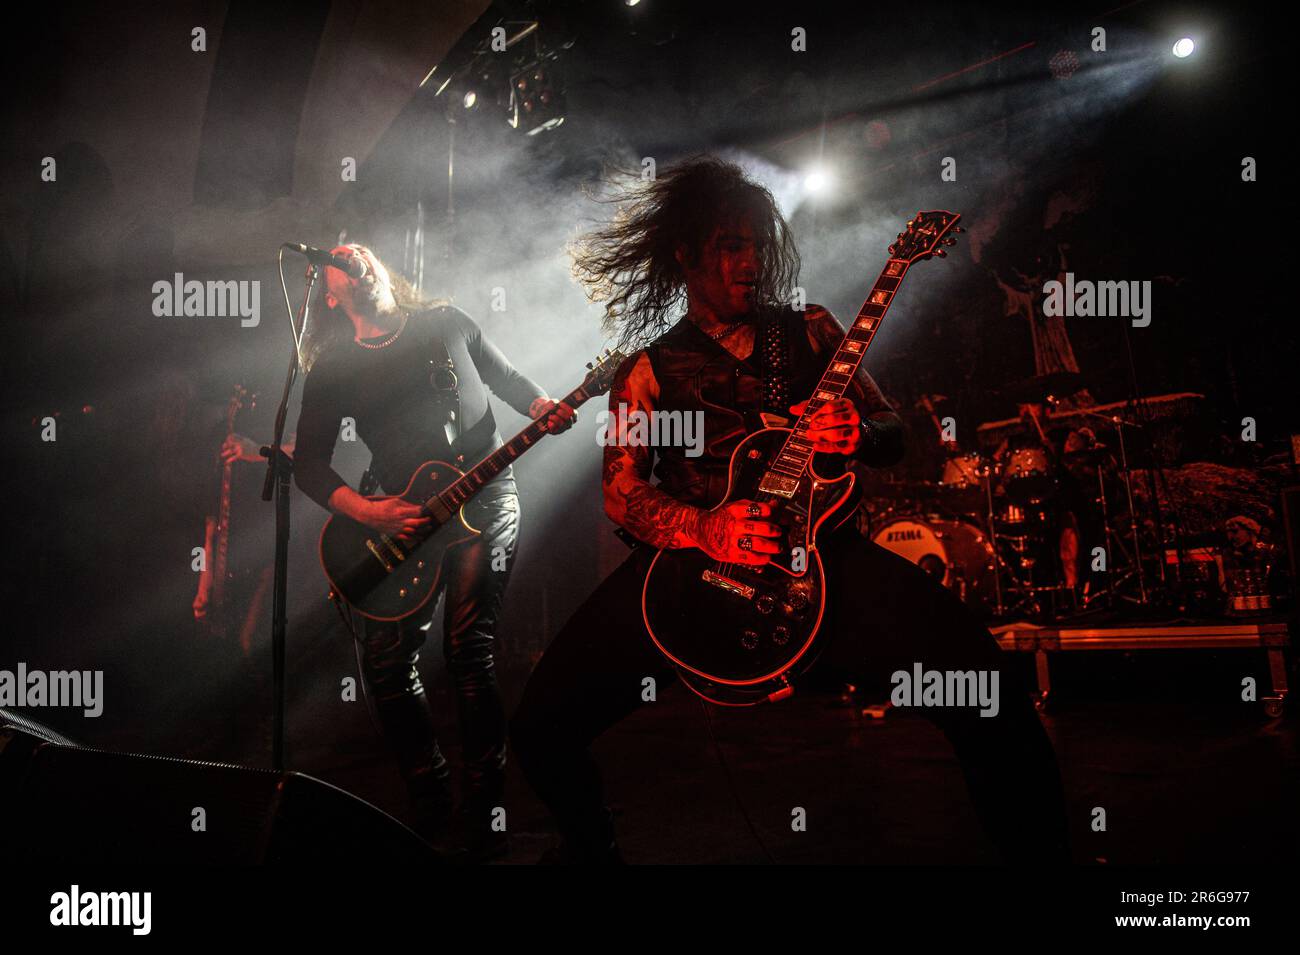 Greek black metal band Rotting Christ performs on stage during the Wave-Gotik-Treffen festival in Leipzig. Wave-Gotik-Treffen is an annual world festival for 'dark' music and 'dark culture' in Leipzig, Germany. In 2023 it took place from 26 to 29 May, and collected about 20,000 visitors and 200 bands of different genres at several venues throughout the city. Stock Photo